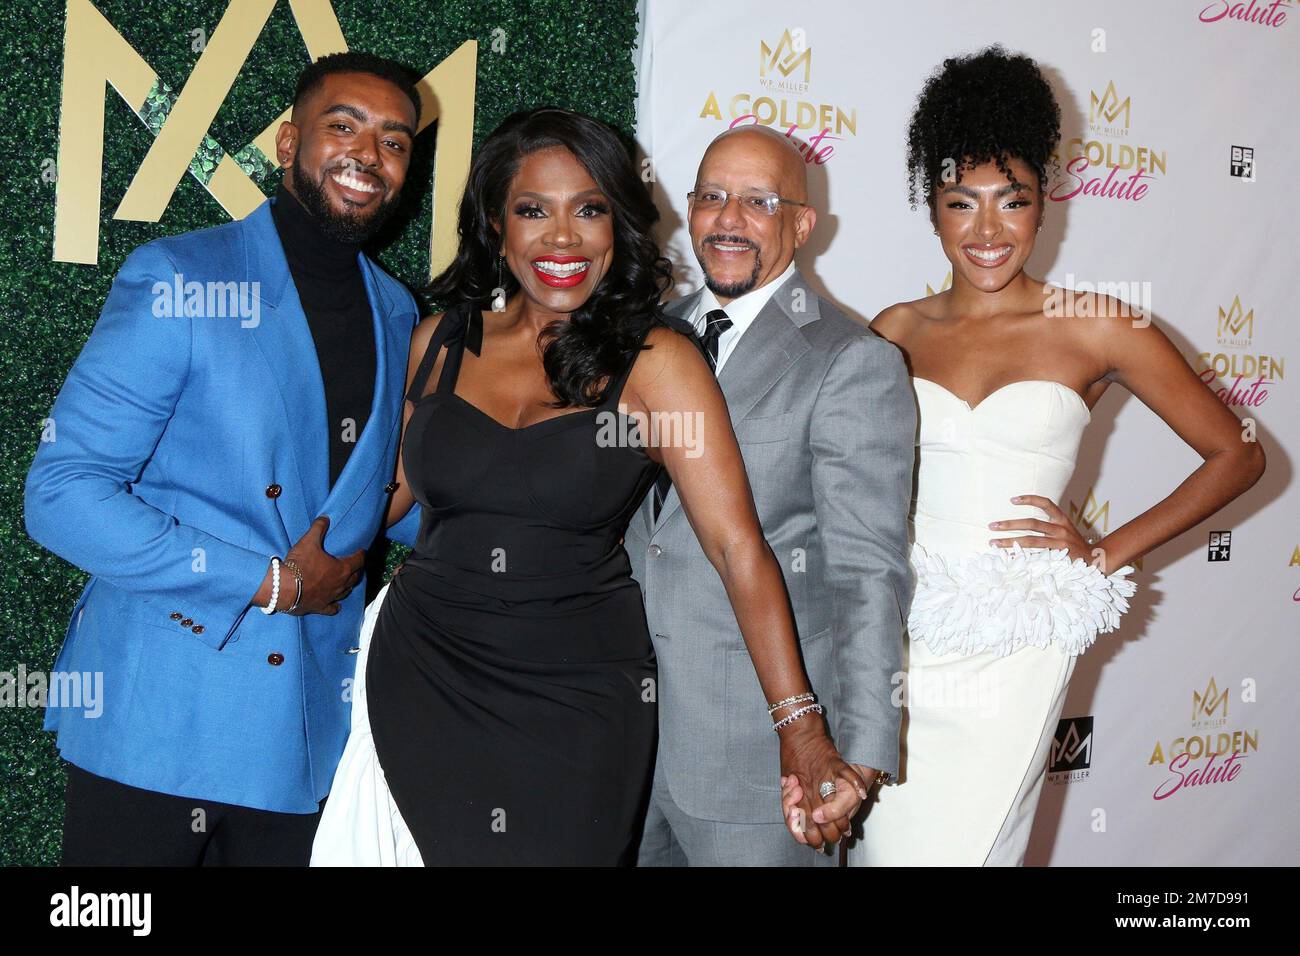 Marina Del Rey, CA. 8th Jan, 2023. Etienne Maurice, Sheryl Lee Ralph, Vincent Hughes, Ivy-Victoria Maurice at arrivals for A Golden Salute Honoring Golden Globe Nominees, Ritz Carlton Hotel, Marina Del Rey, CA January 8, 2023. Credit: Priscilla Grant/Everett Collection/Alamy Live News Stock Photo